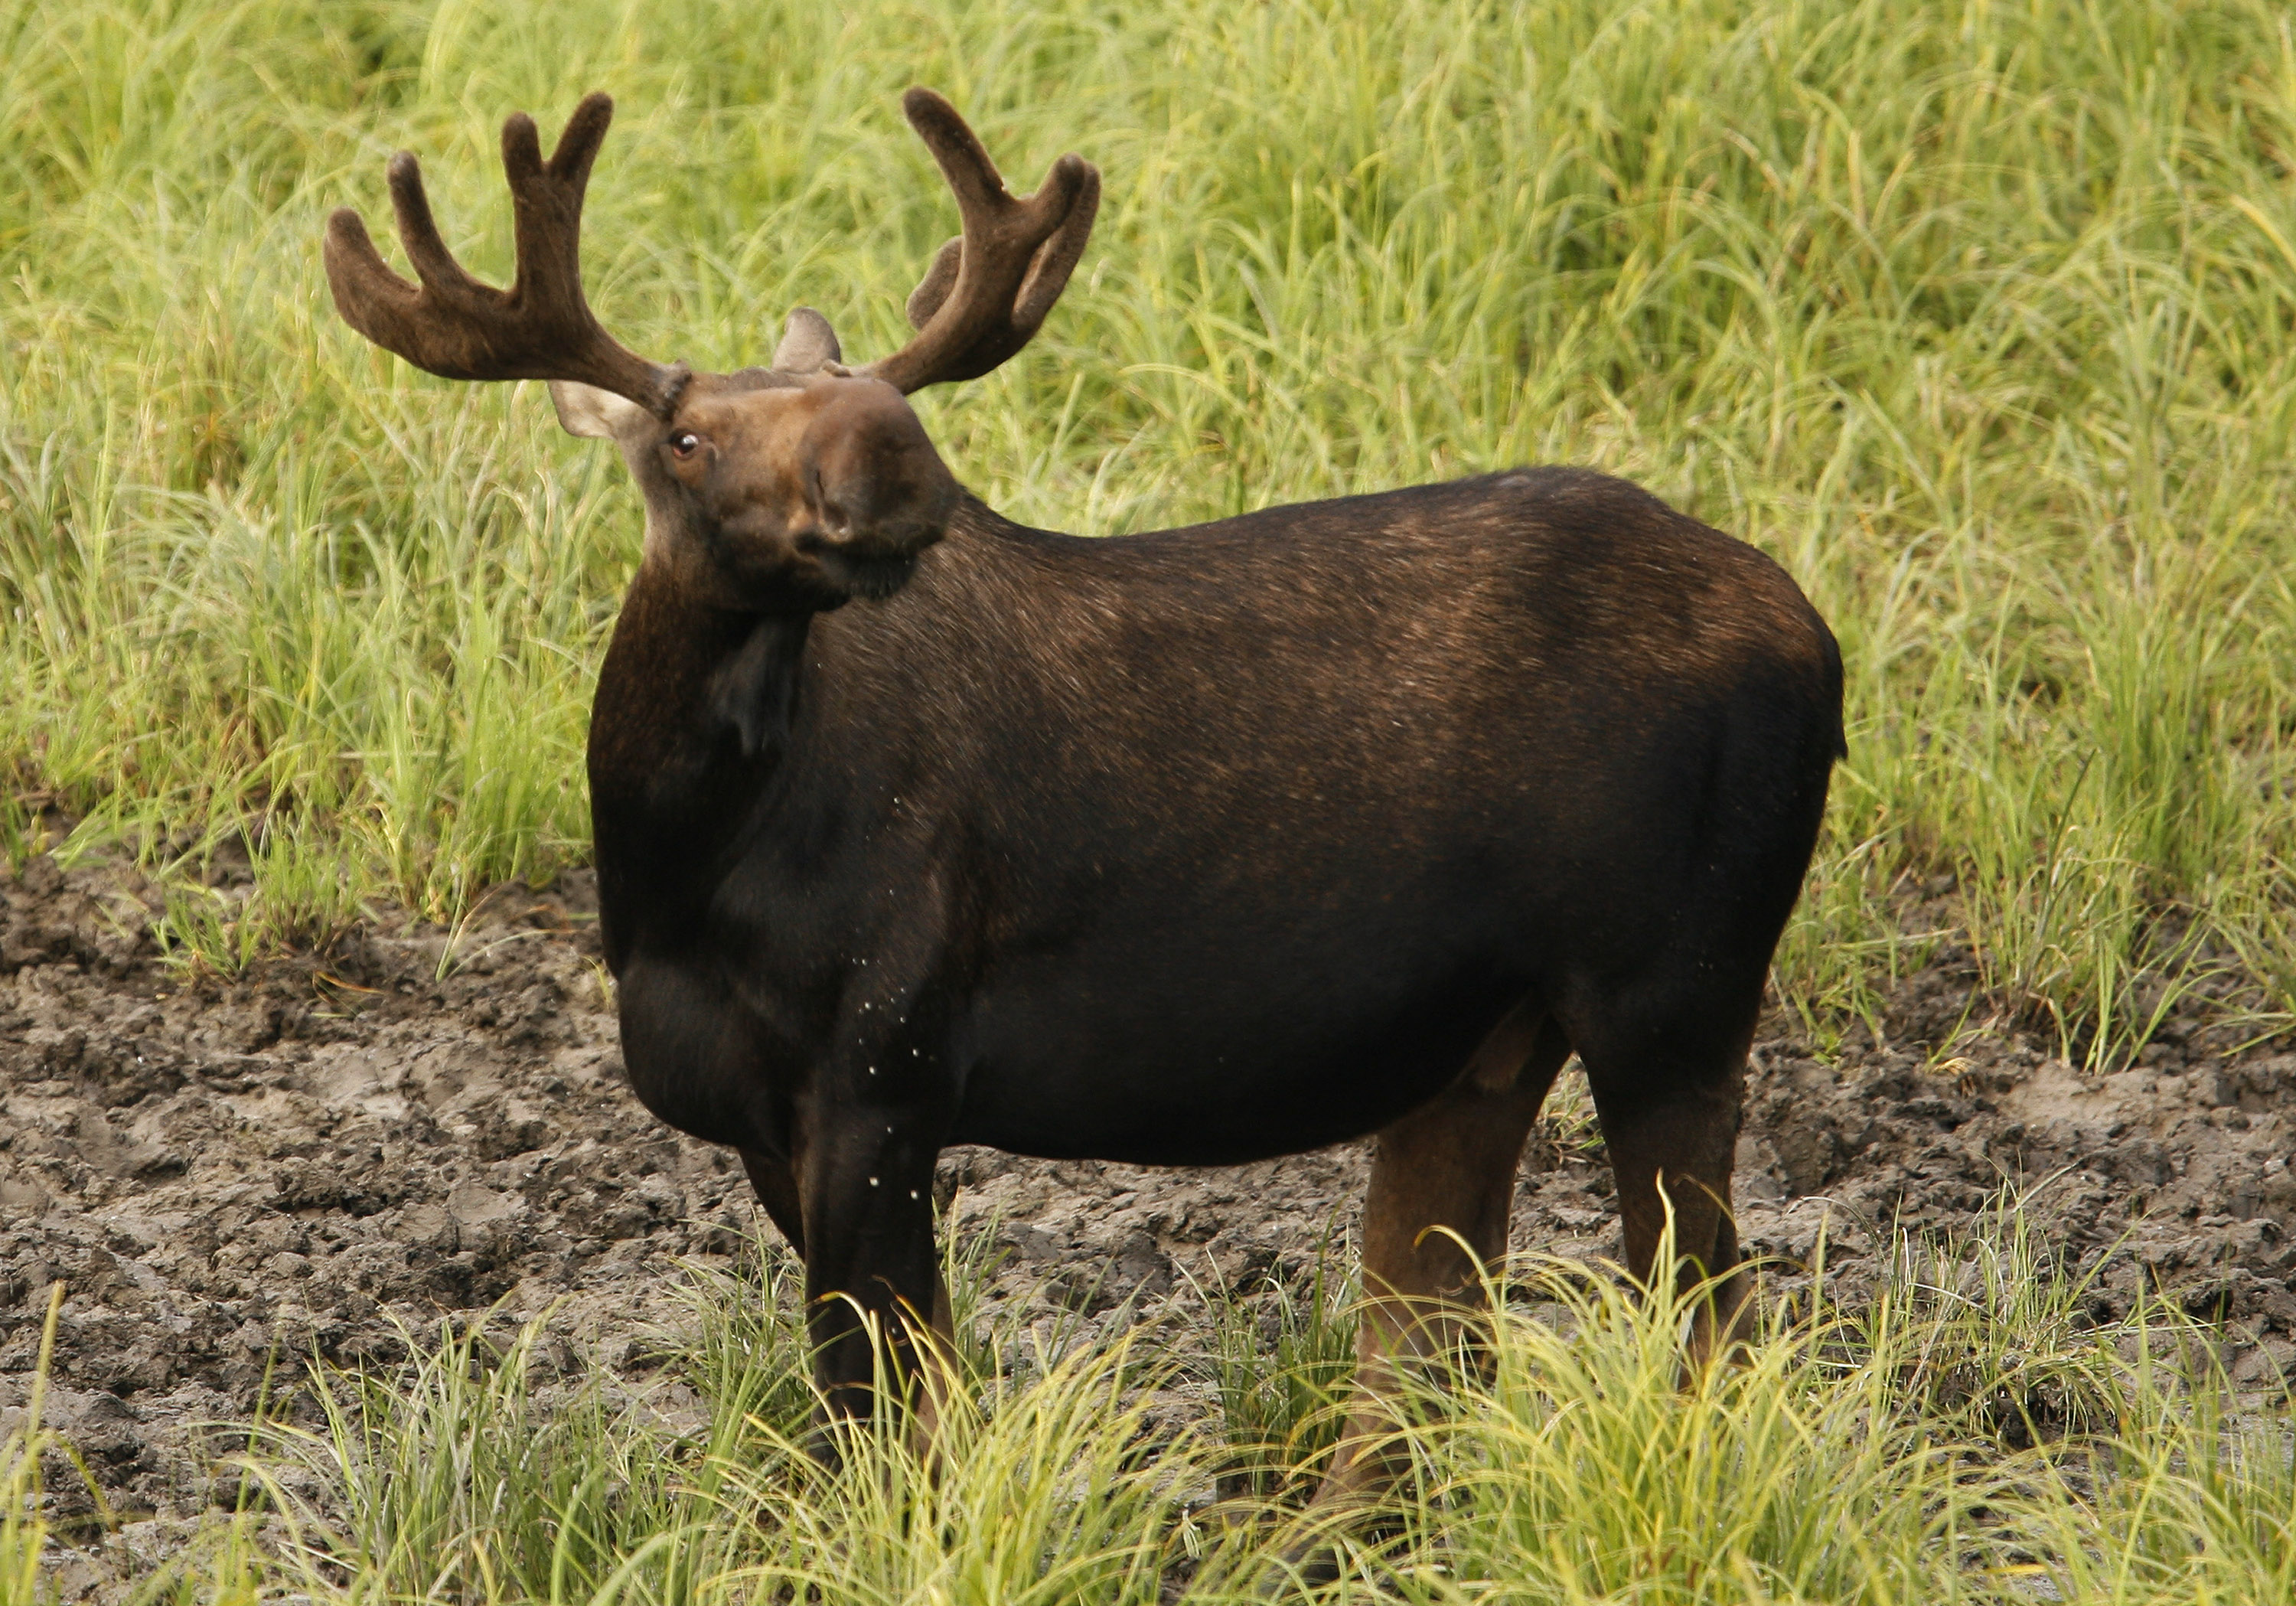 A bull moose looks up while grazing in a field near Anchorage, Alaska